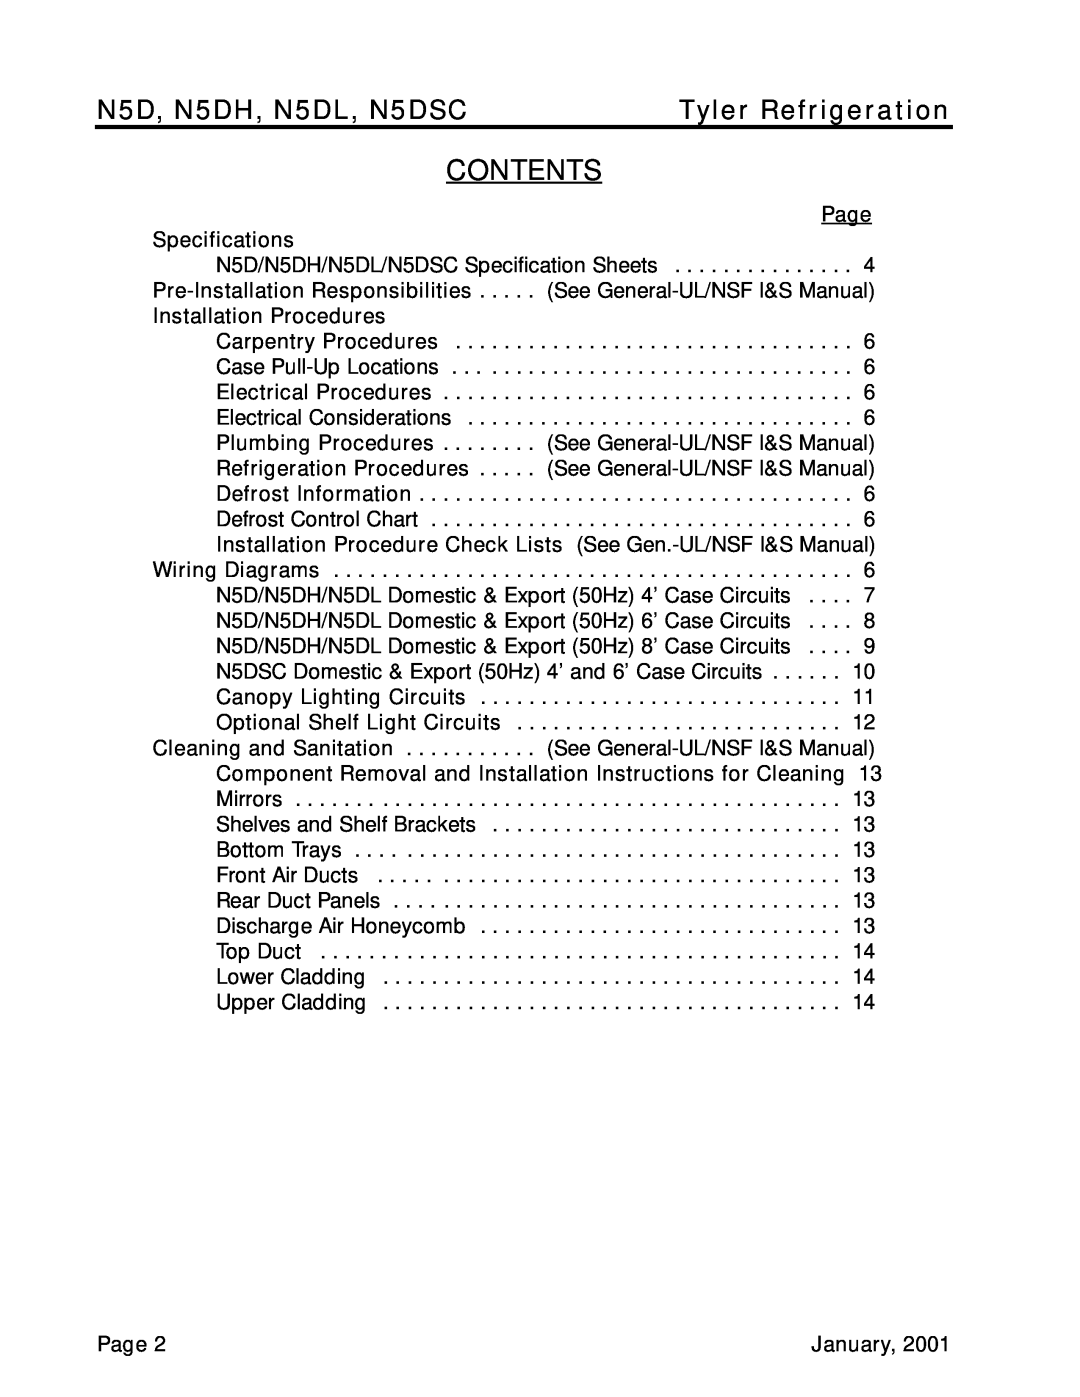 Tyler Refrigeration service manual Contents, N5D, N5DH, N5DL, N5DSC, Tyler Refrigeration 